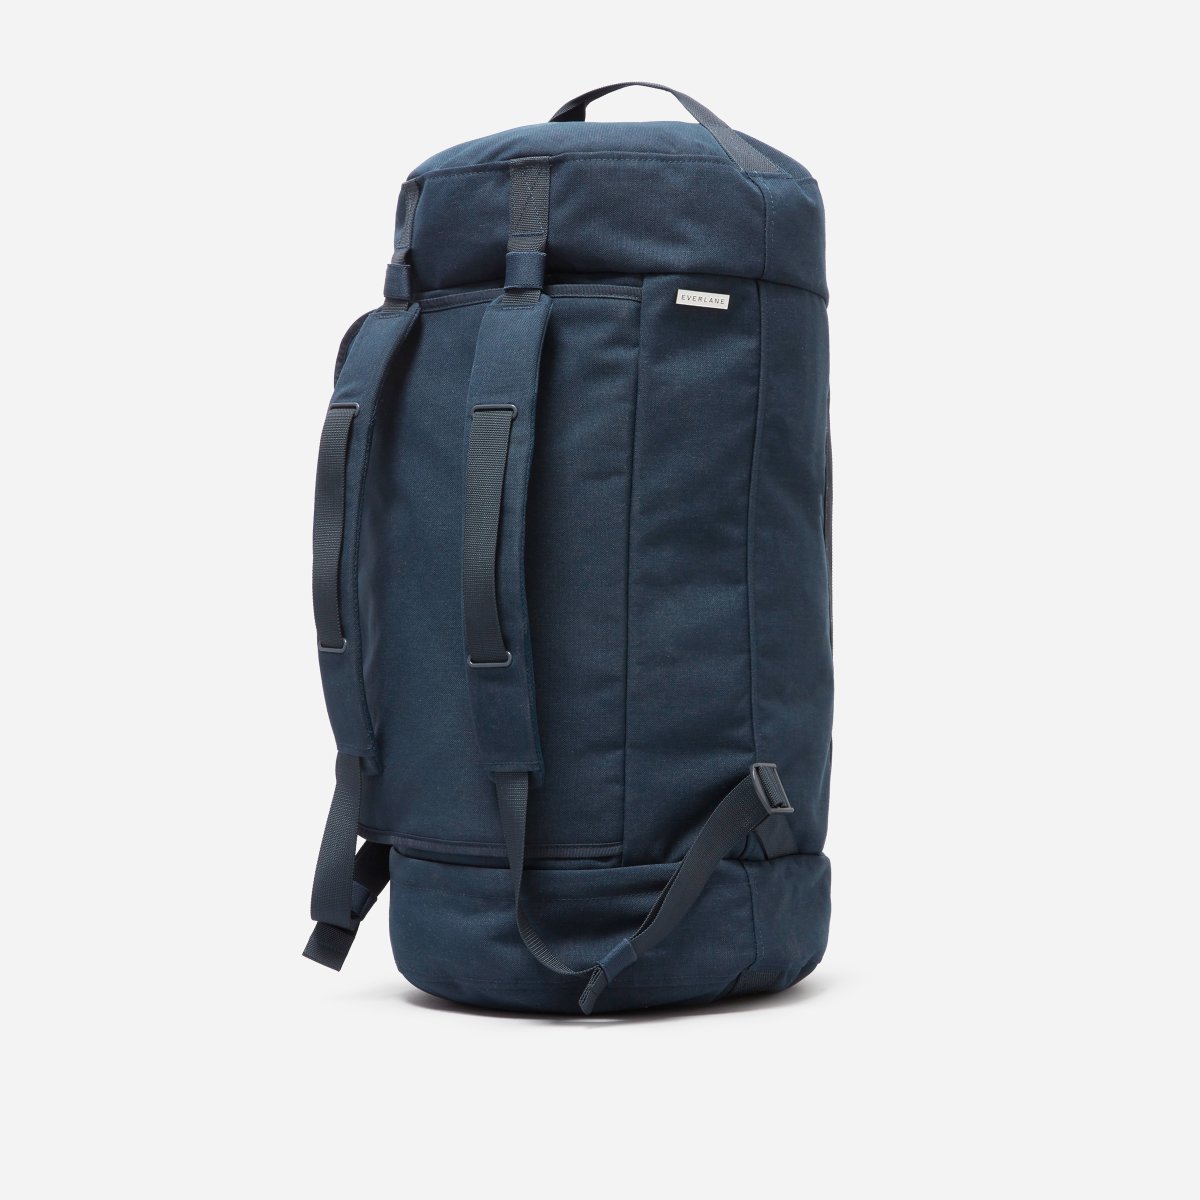 The mover pack from Everlane